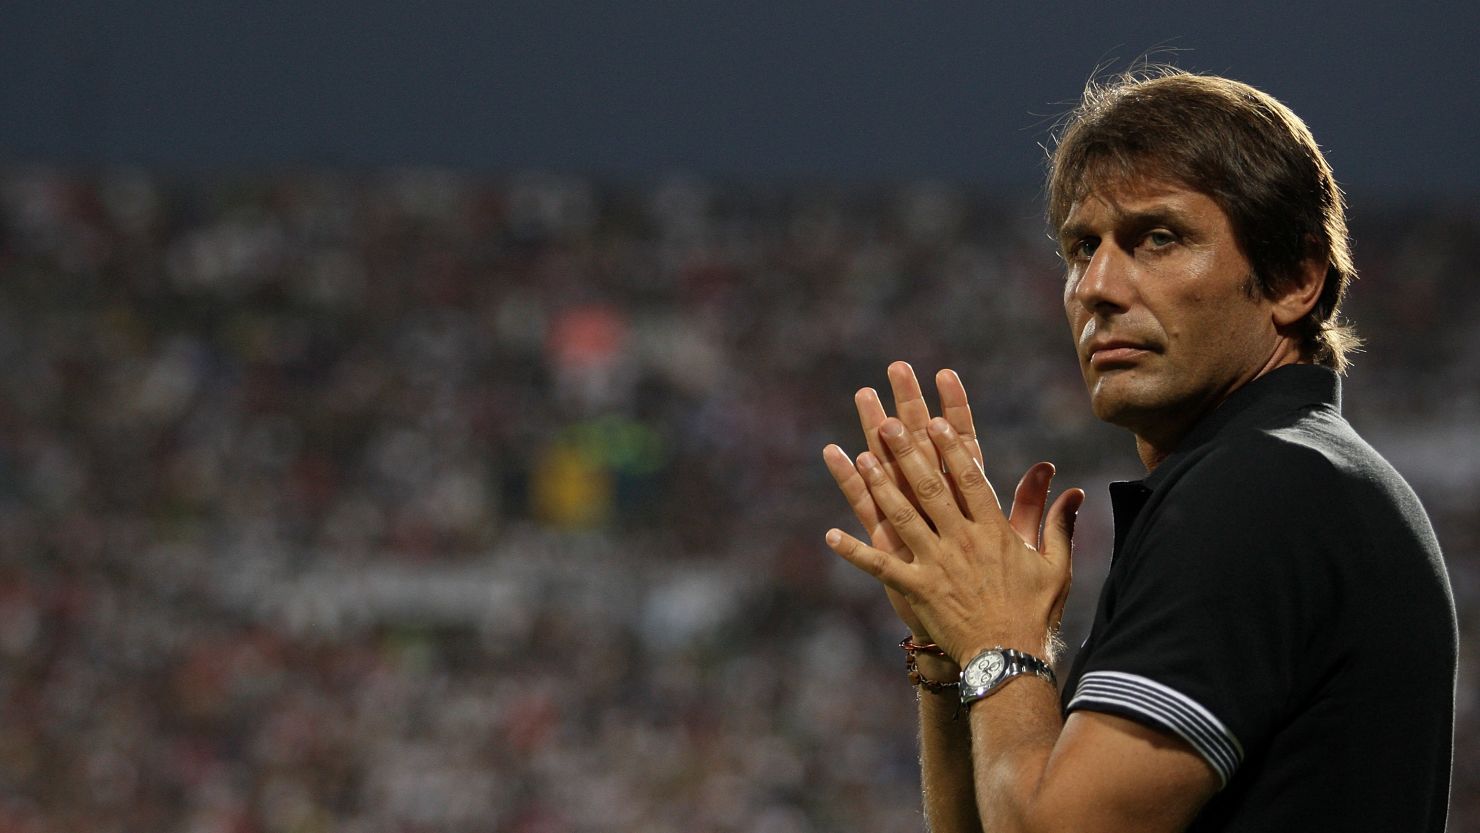 Antonio Conte is suspended for 10 months from football amid match-fixing allegations.